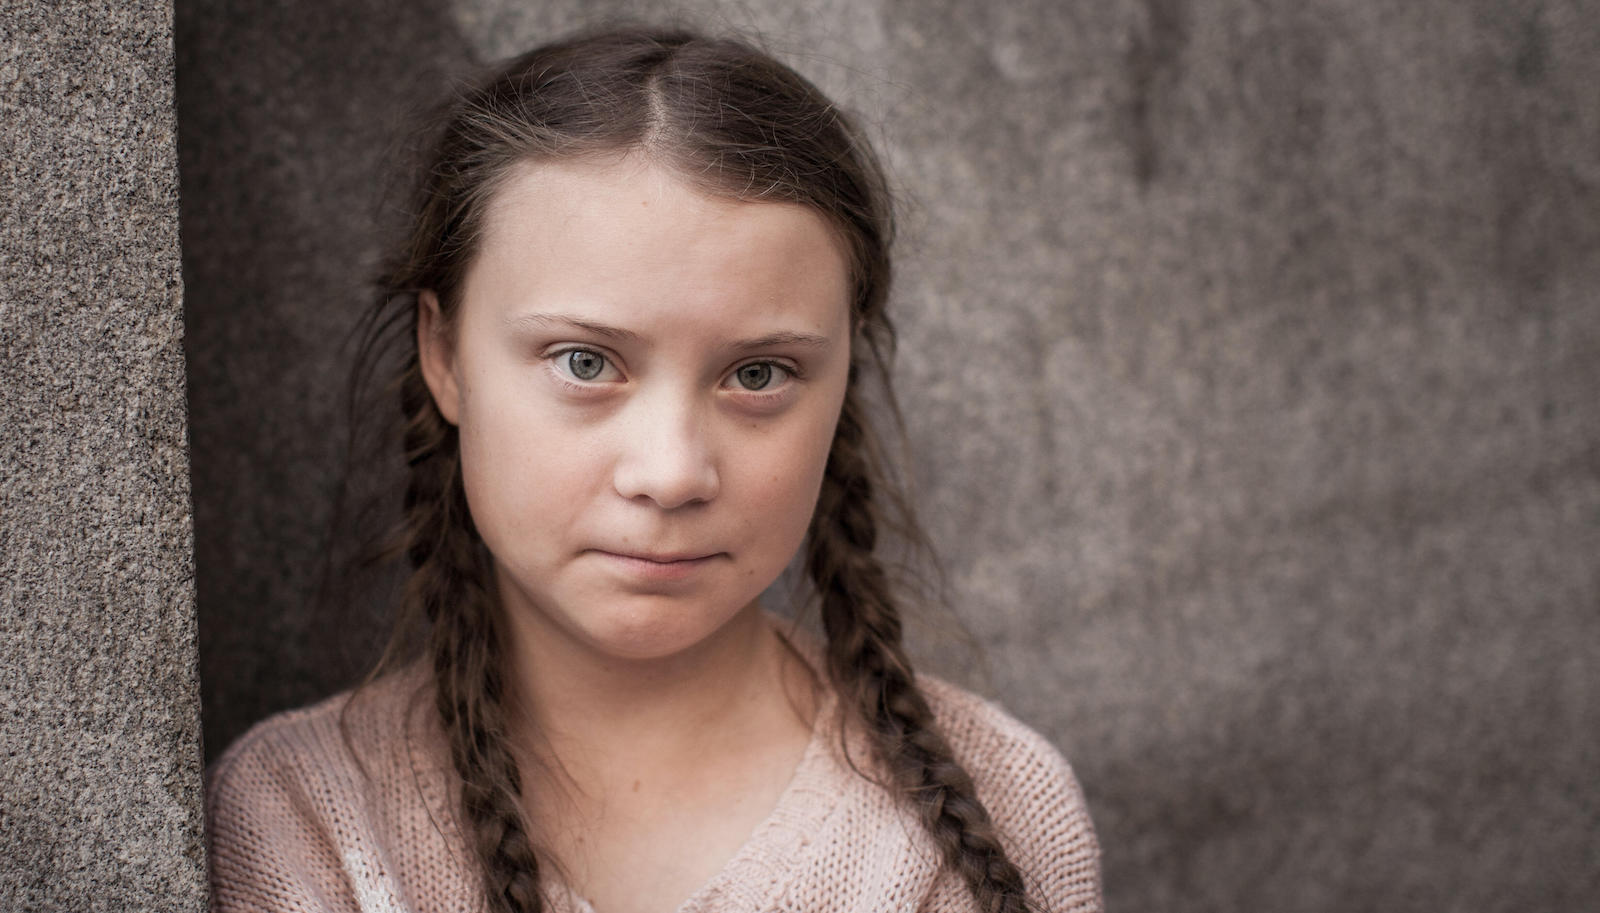 An image of Greta Thunberg, 17-year-old climate activist